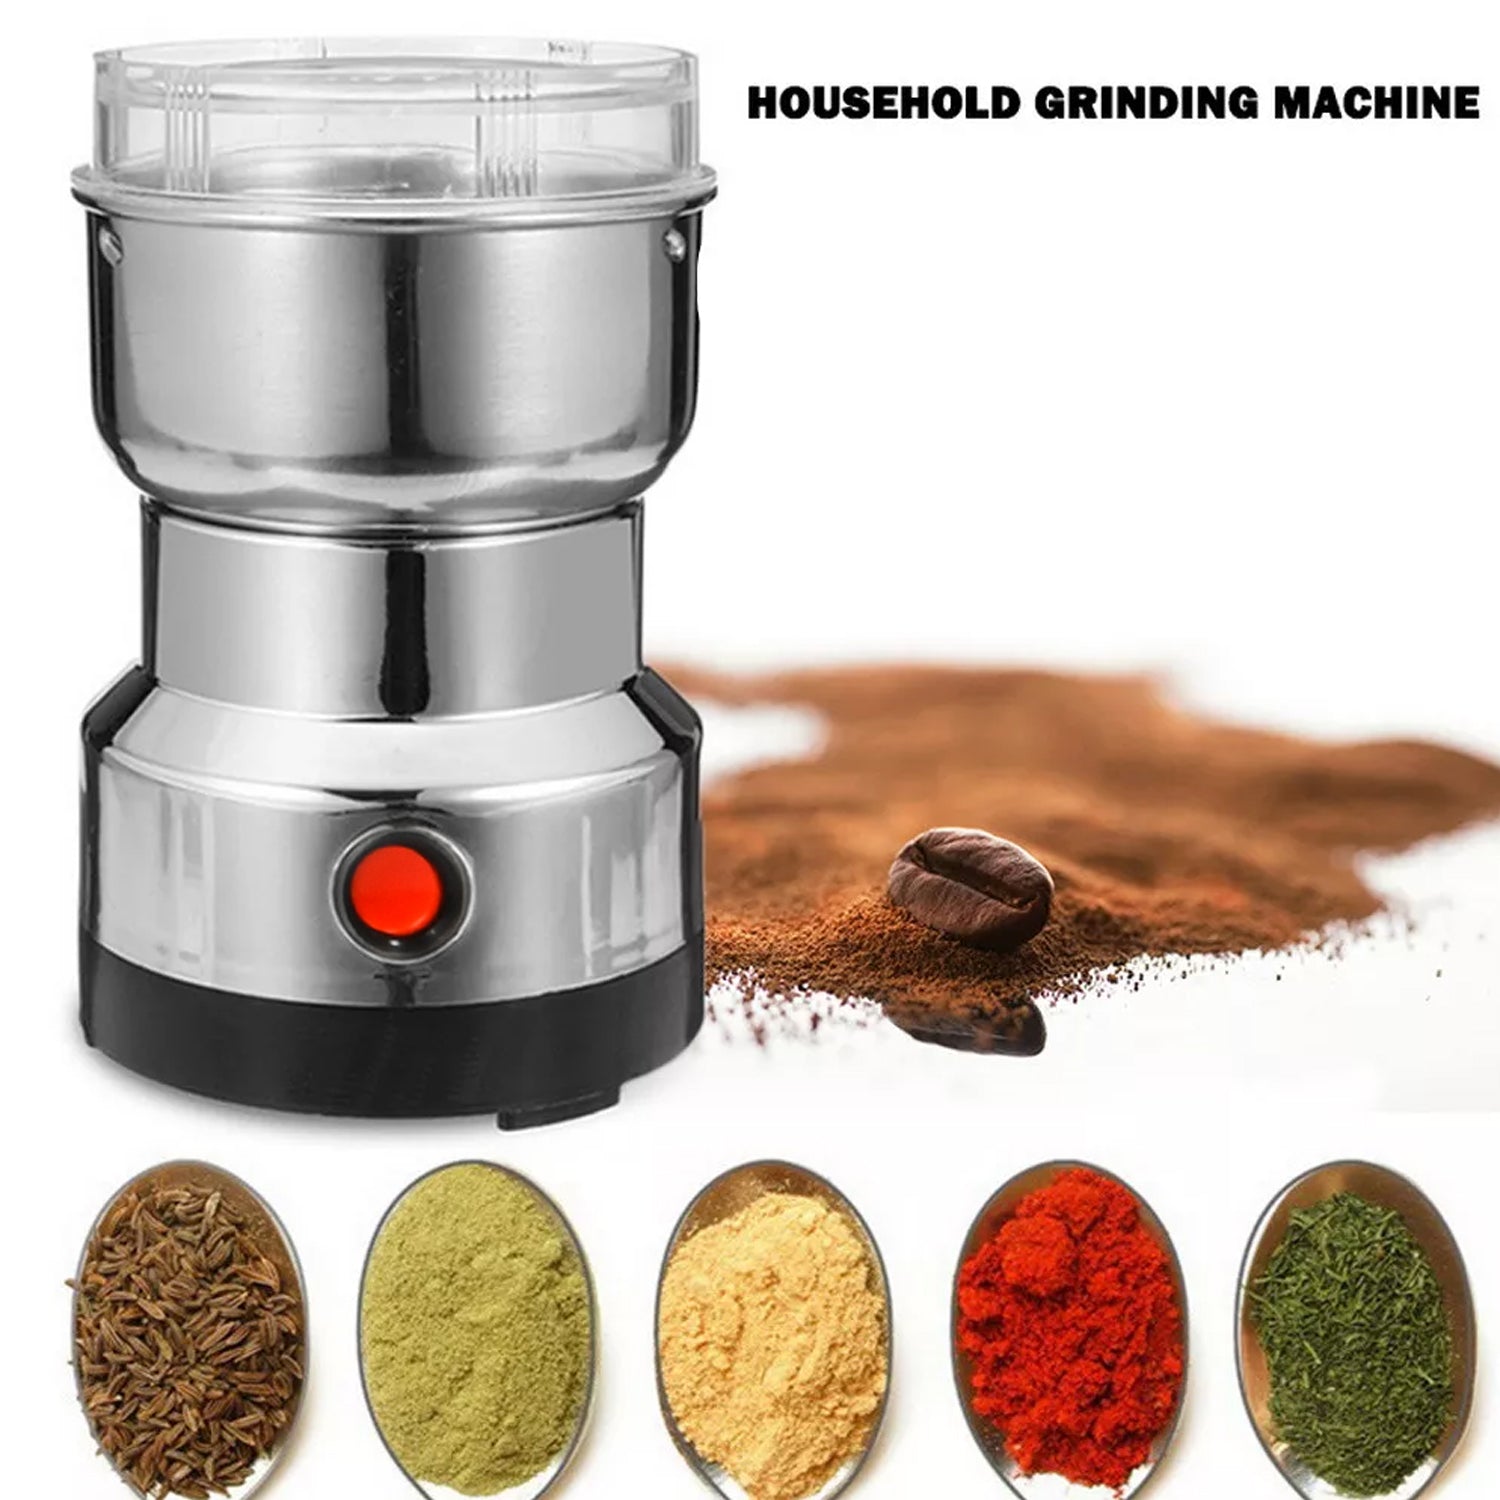 2898 Multifunction Grinder Machine Electric Cereals Grain Mill Spice Herbs Grinding Machine Tool Stainless Steel Electric Coffee Bean for Home JK Trends